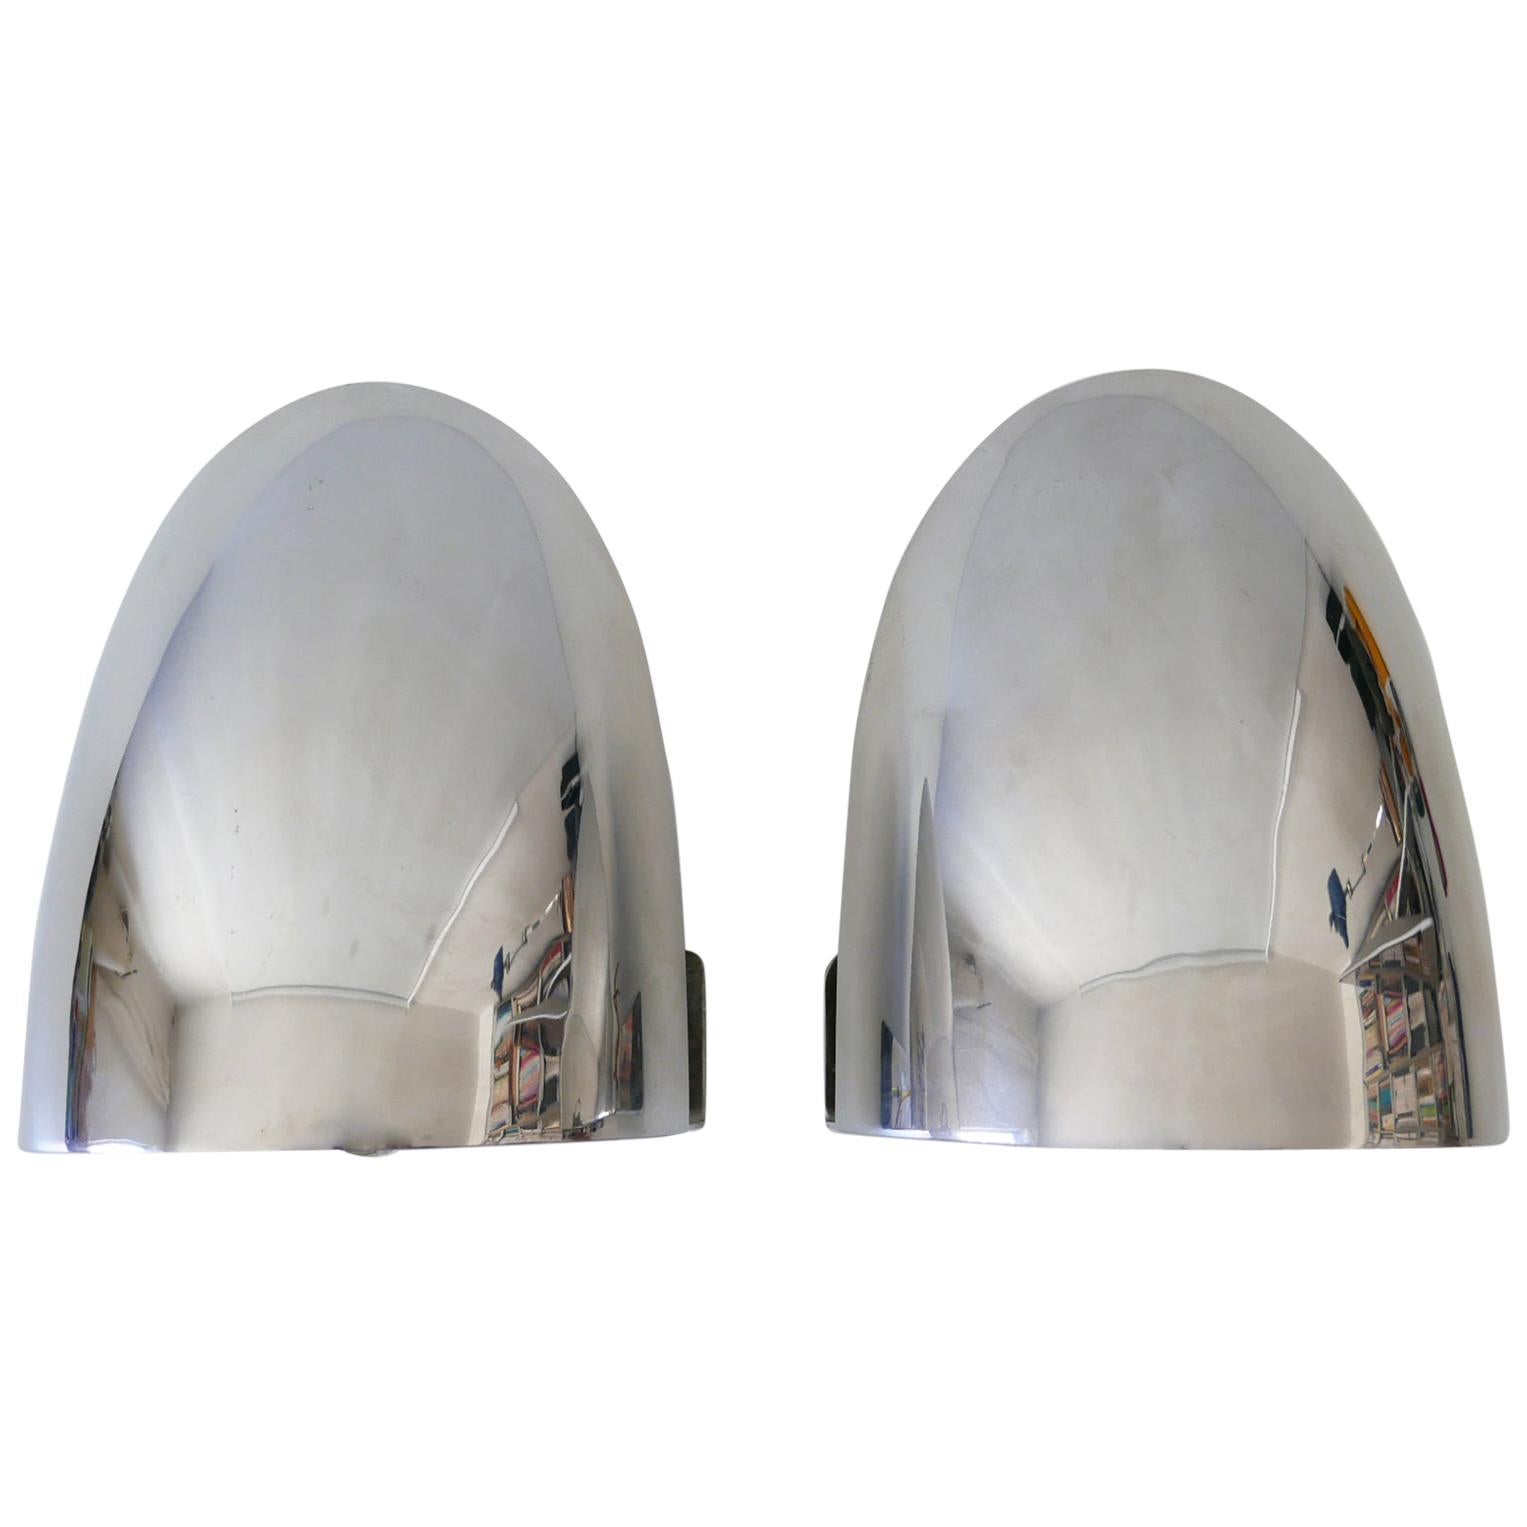 Set of Two Mid-Century Modern Wall Lamps or Sconces, 1970s, Germany For Sale